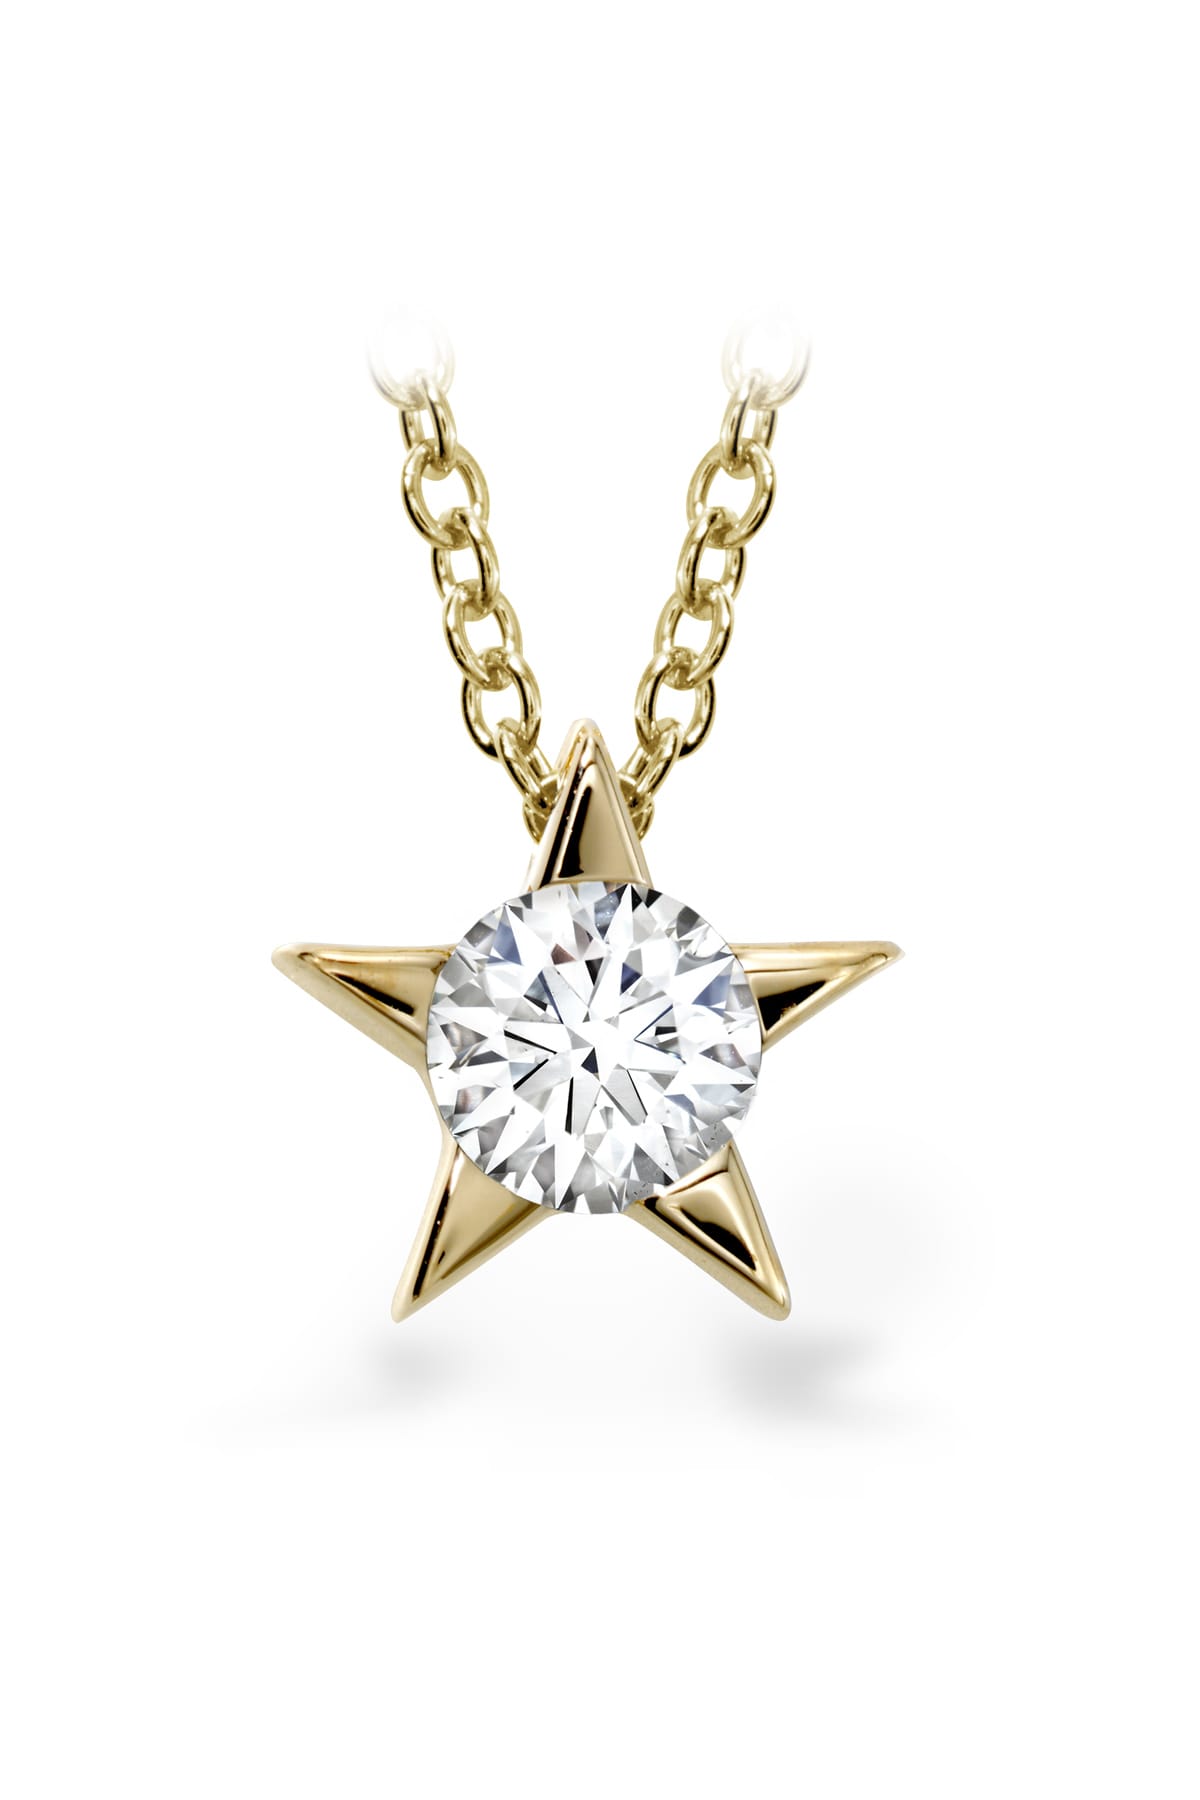 Illa Pendant Necklace From Hearts On Fire available at LeGassick Diamonds and Jewellery Gold Coast, Australia.